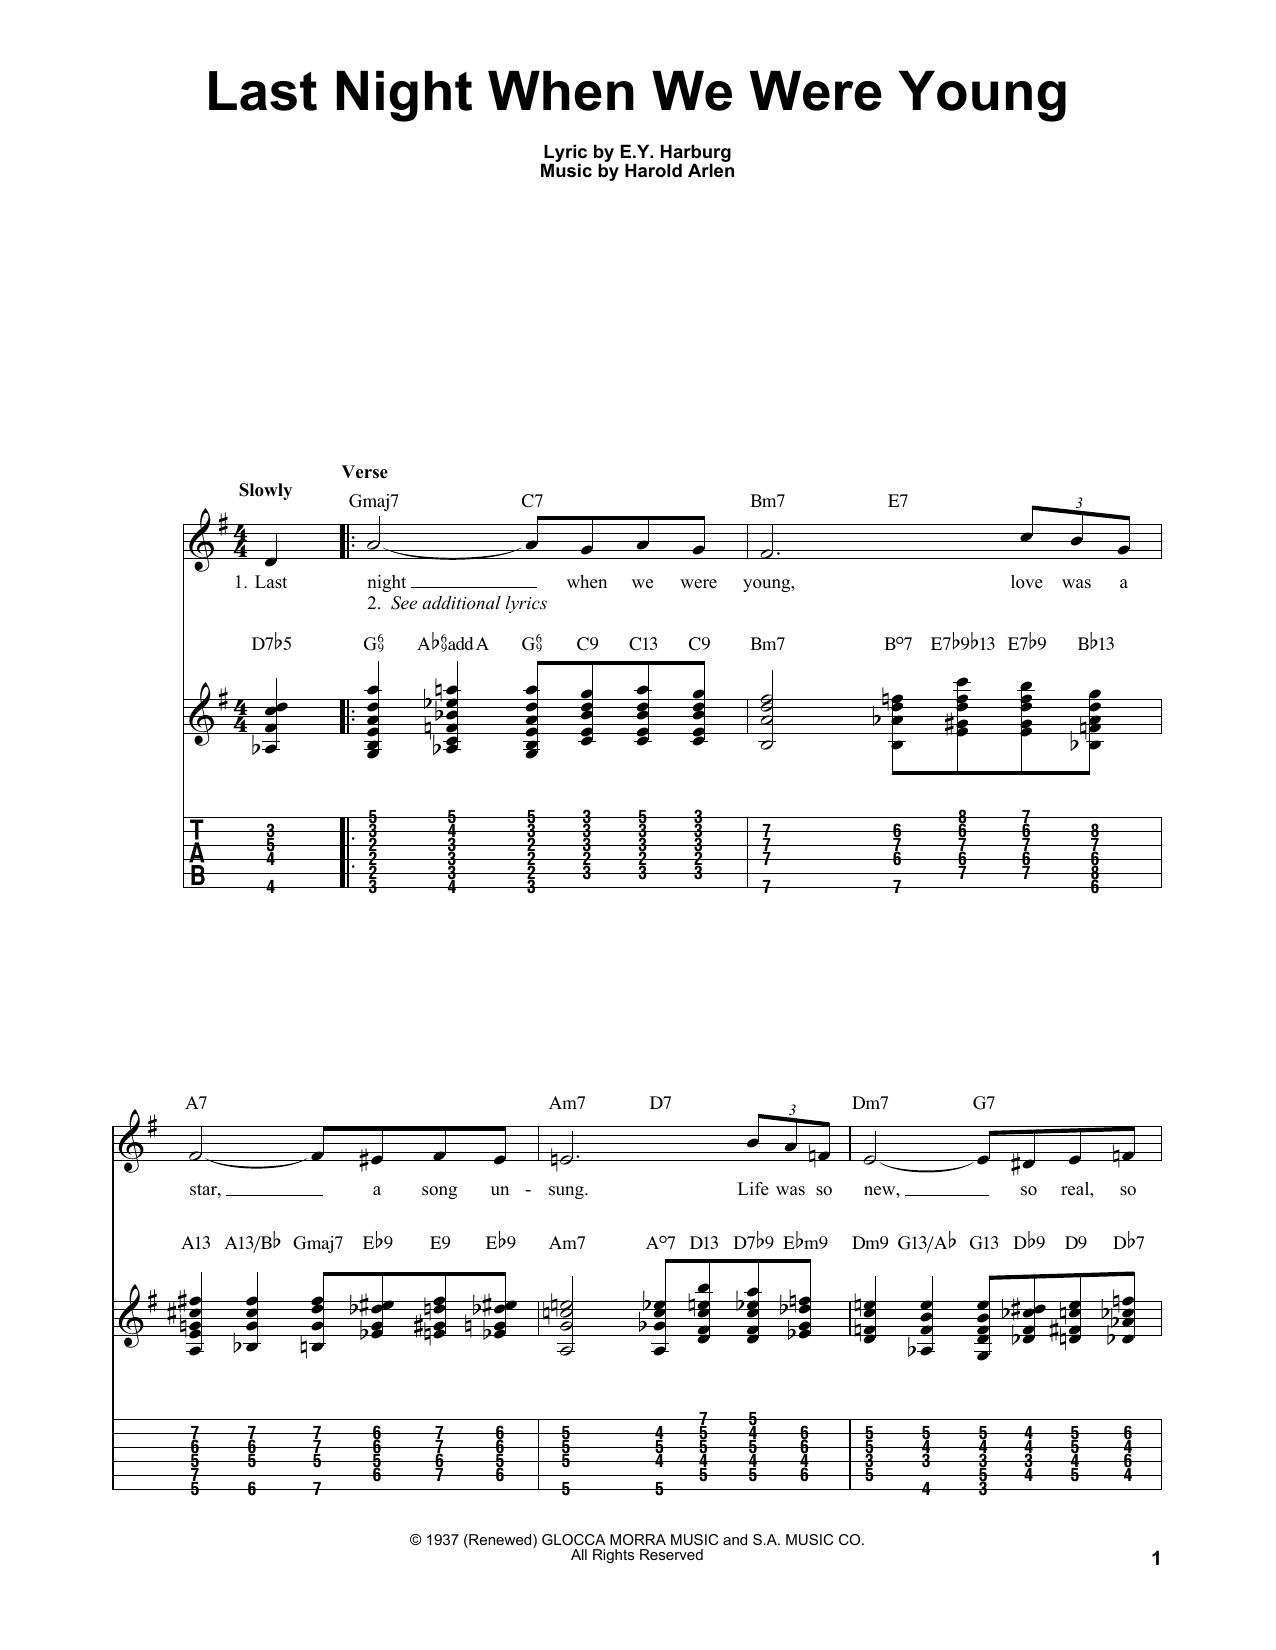 Kenny Burrell Last Night When We Were Young sheet music notes and chords. Download Printable PDF.